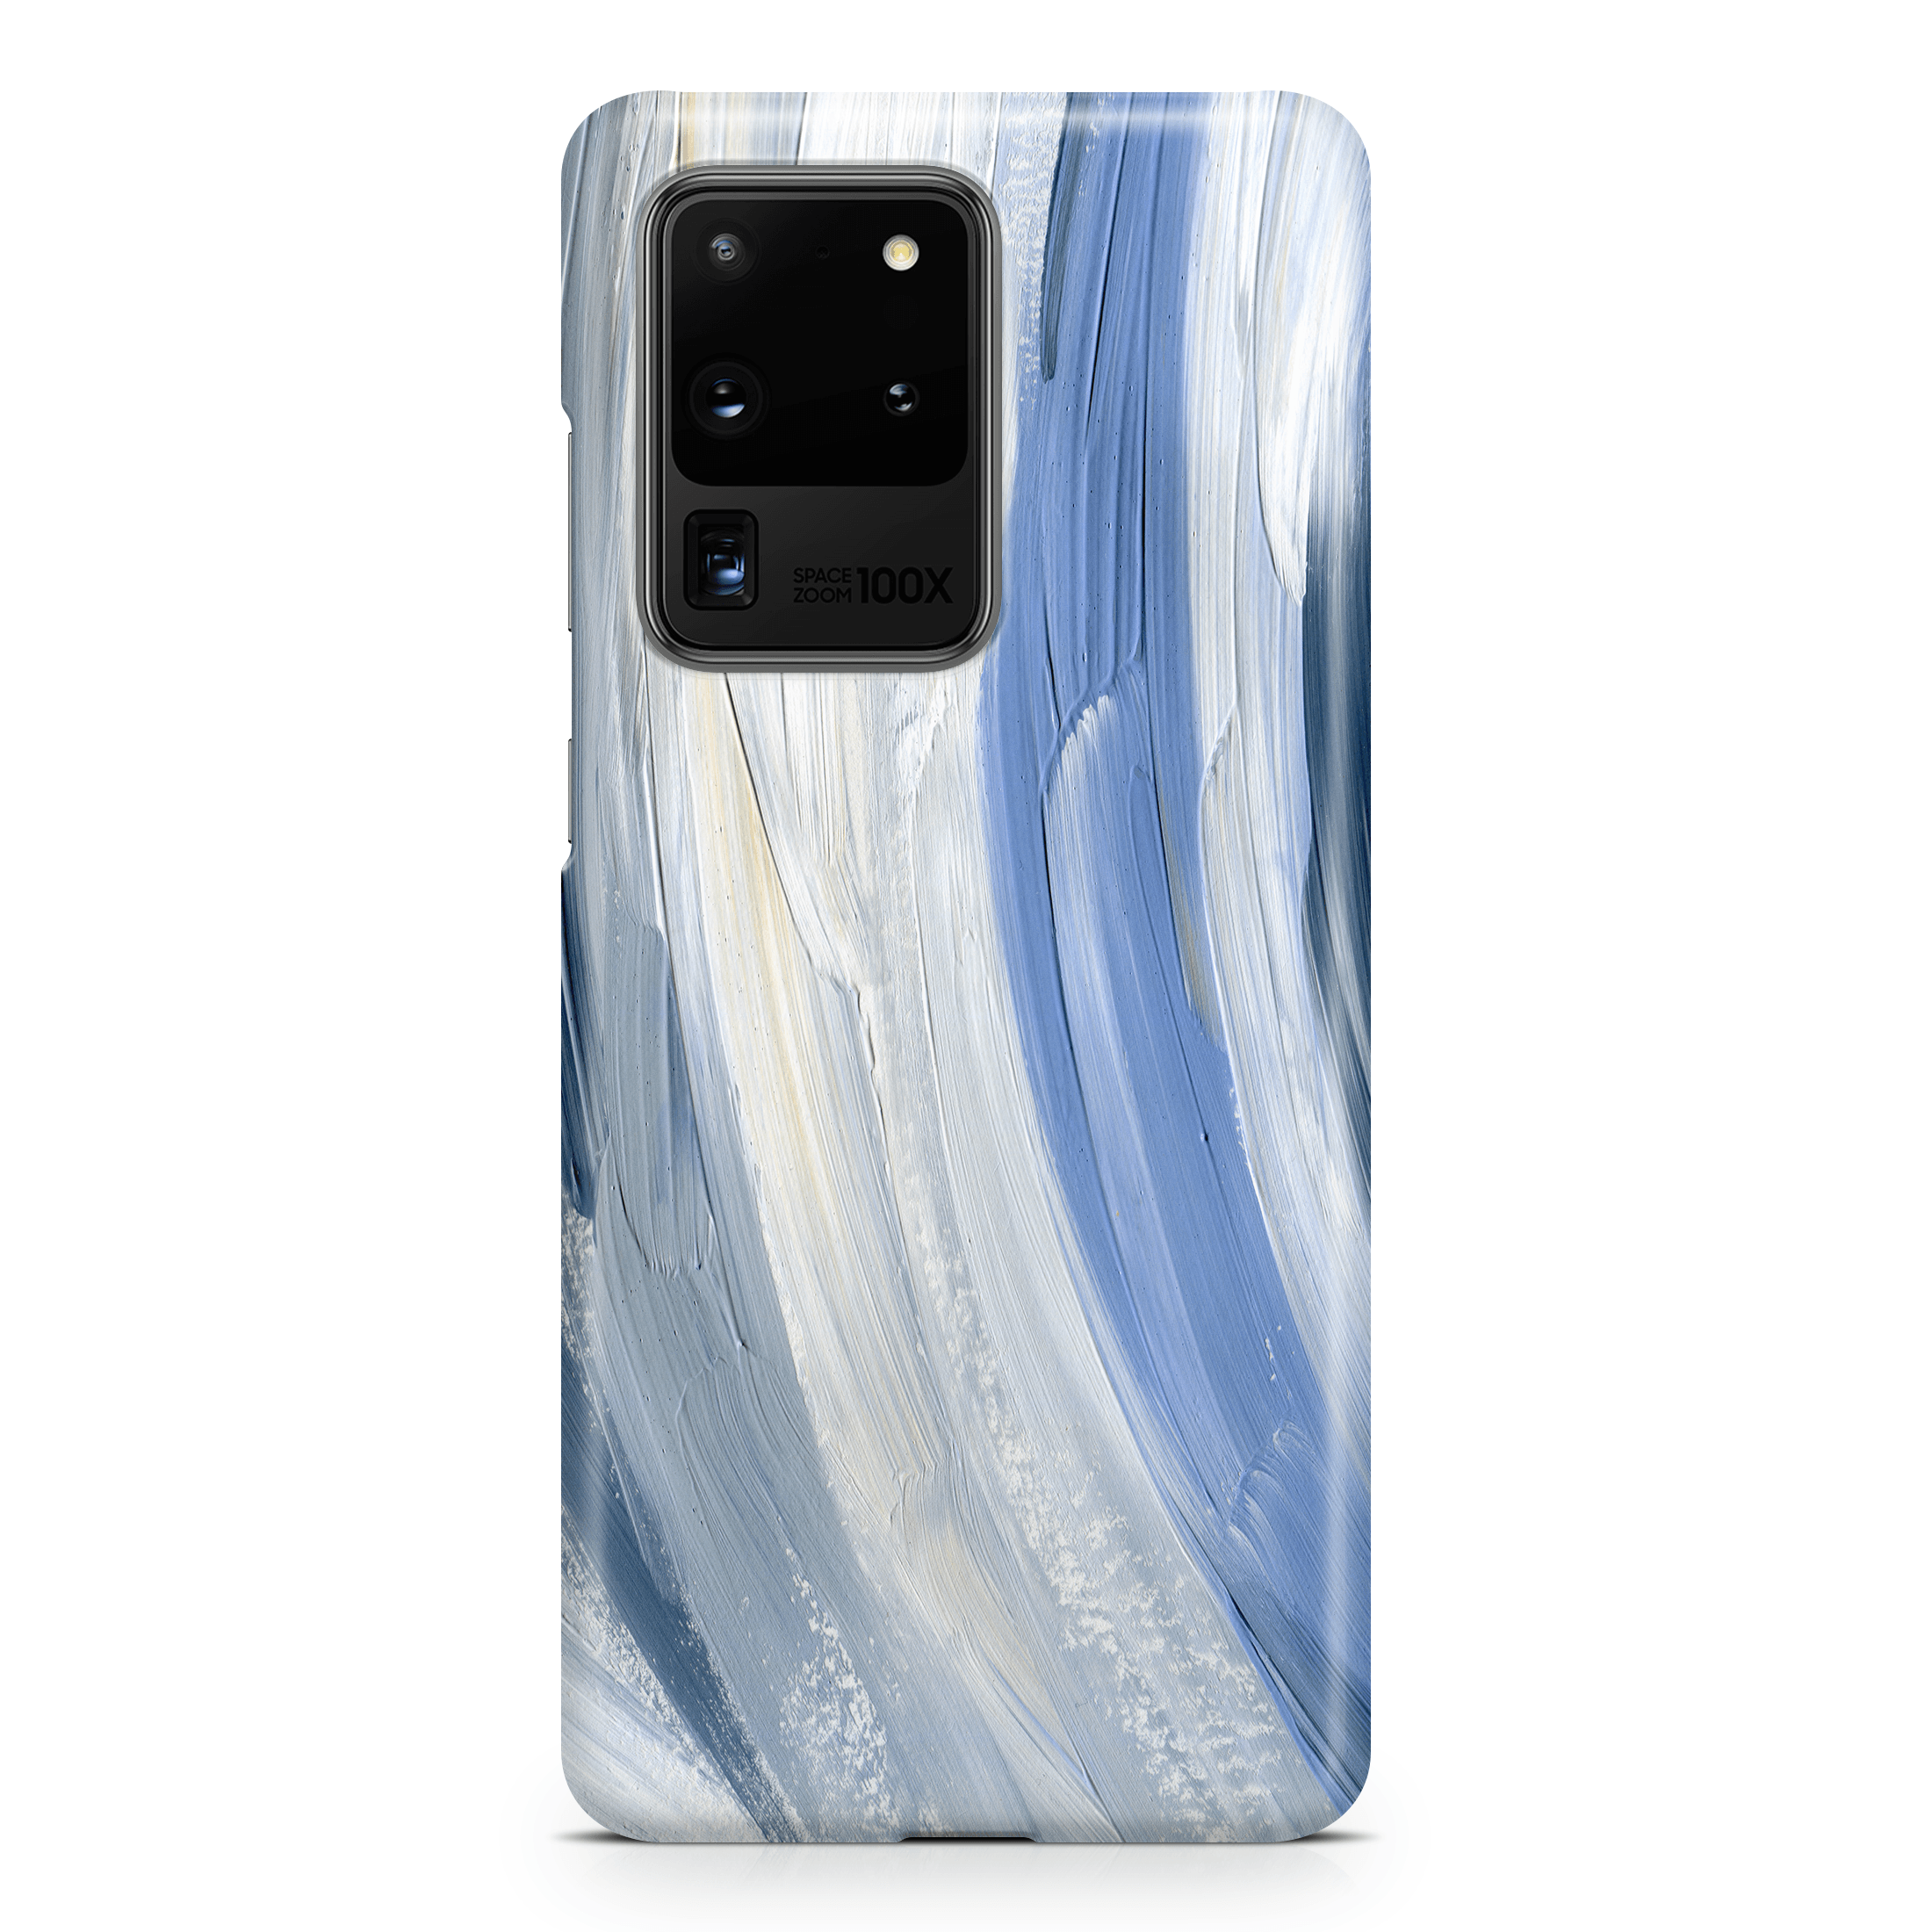 Blue Out - Samsung phone case designs by CaseSwagger